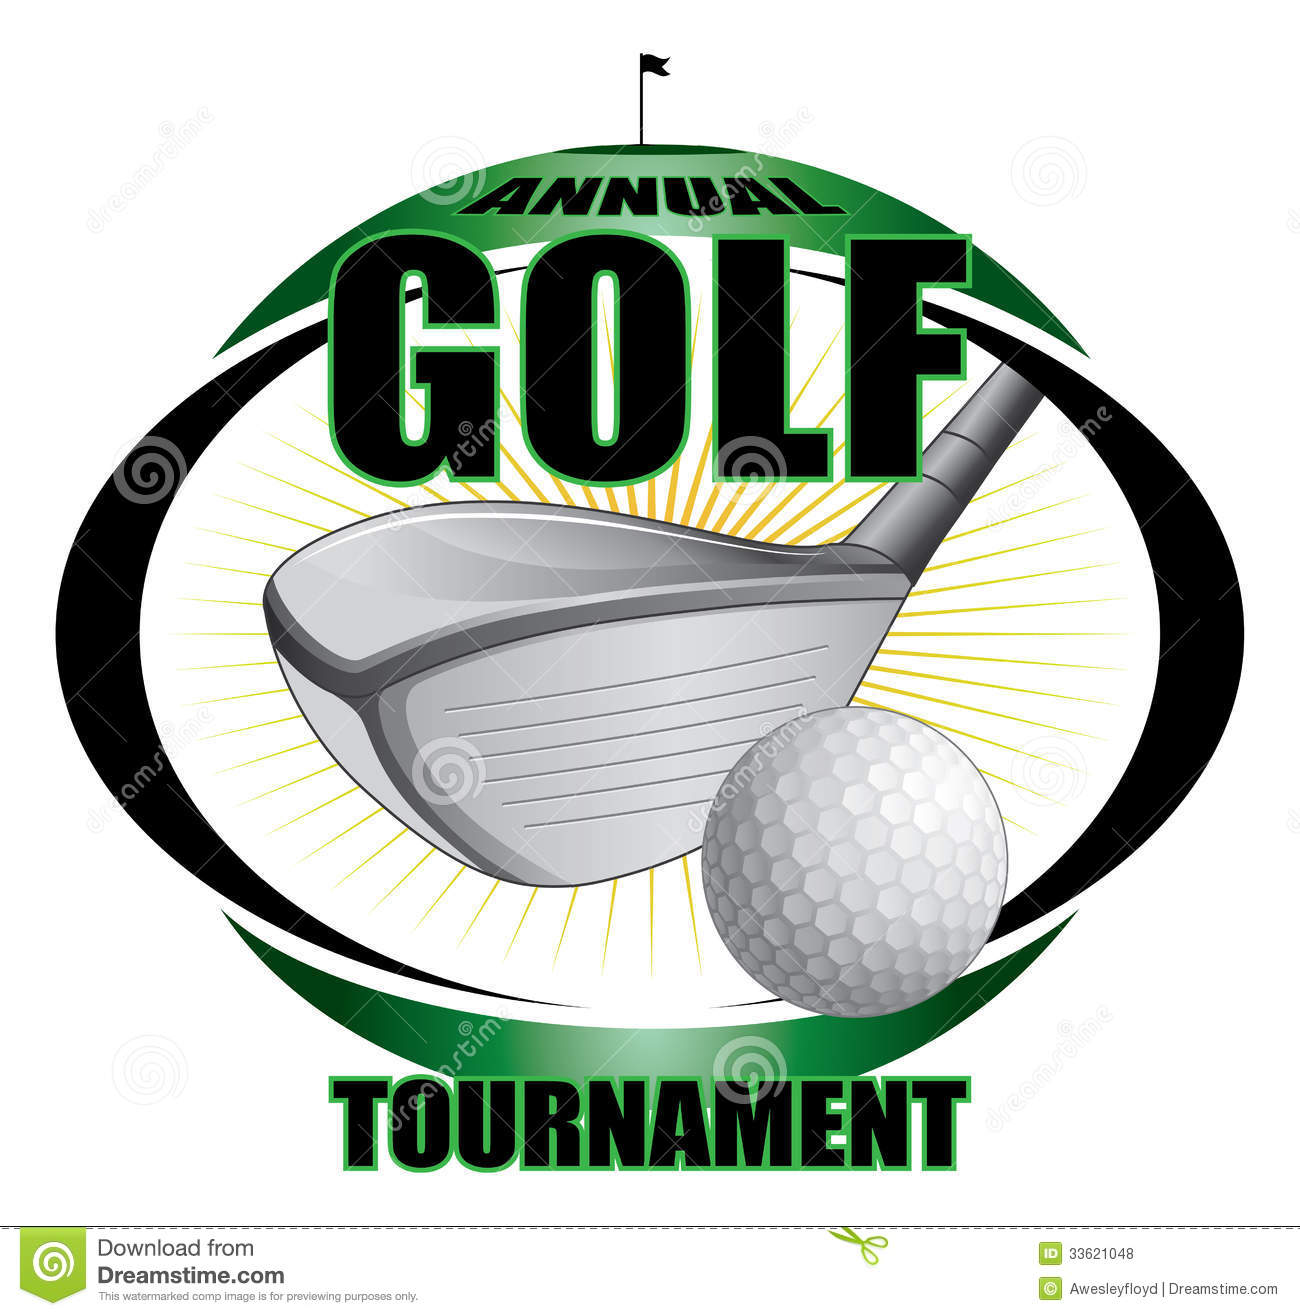 Illustration Of A Golf Tournament Design  Contains Golf Clubs And Golf